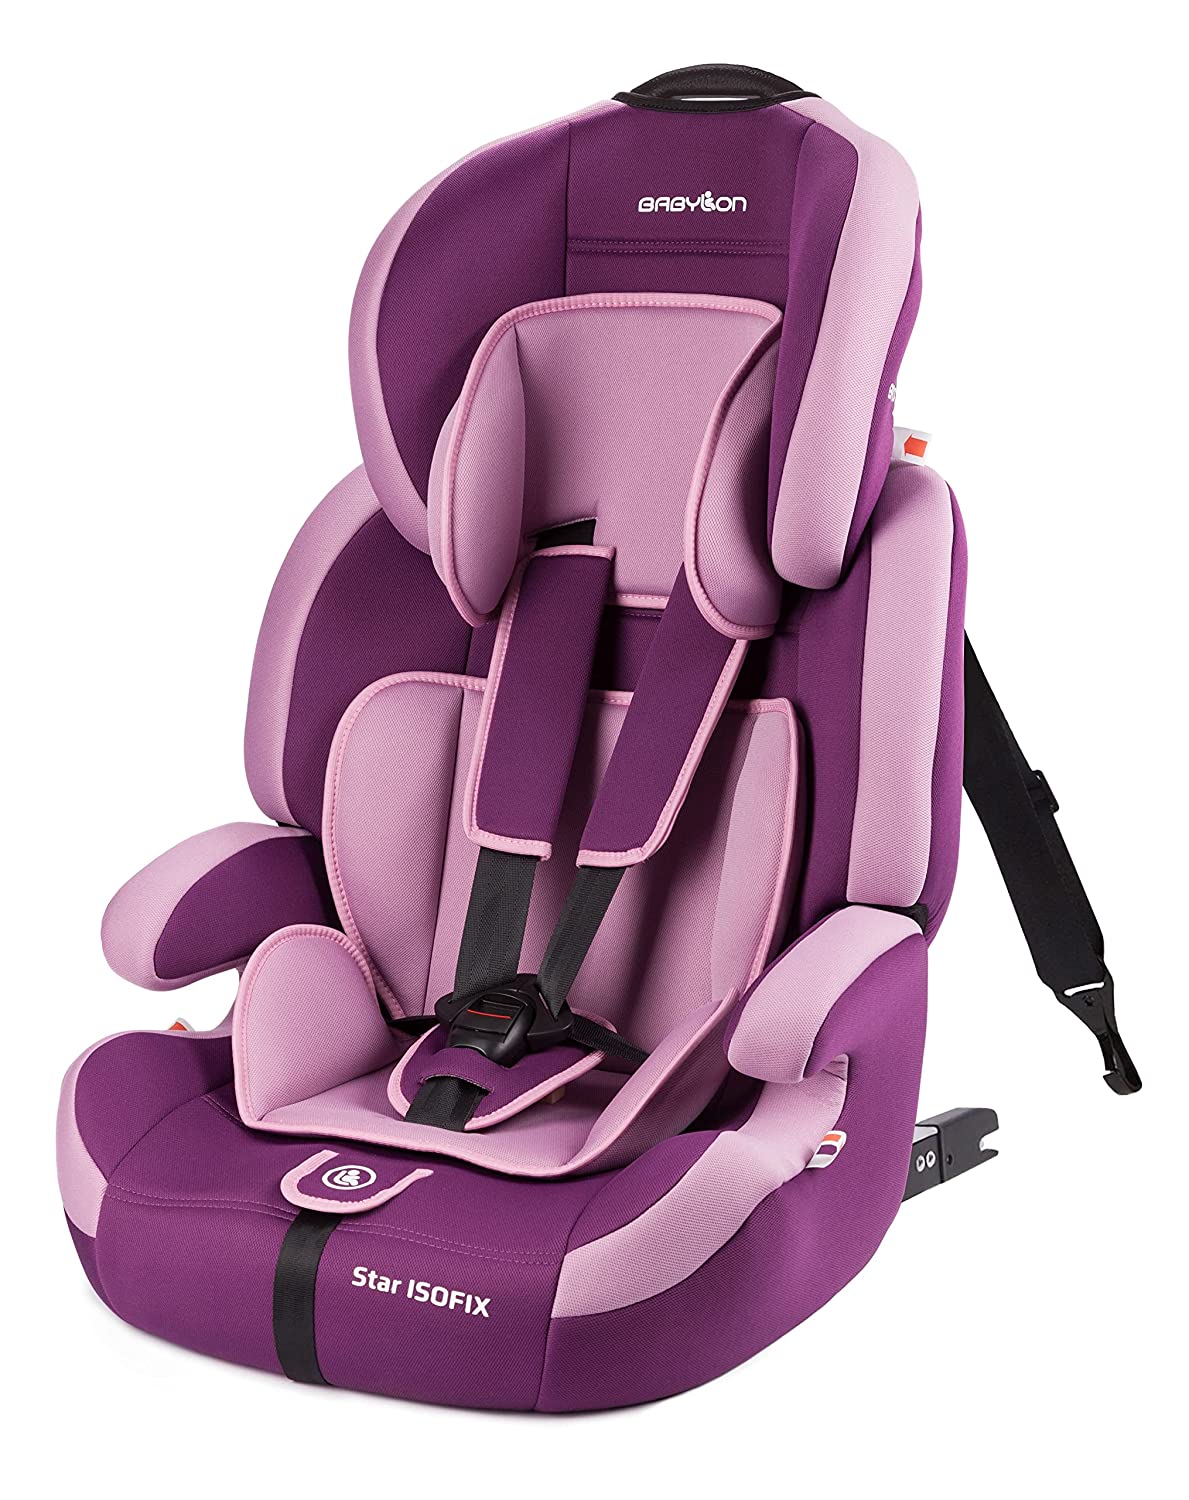 Babylon Star ISOFIX Child Car Seat Group 1/2/3, 9-36 kg Child Seat with Isofix and Top Tether 5-Point Seat Belt Car Seat Adjustable Headrest ECE R44/04 Purple